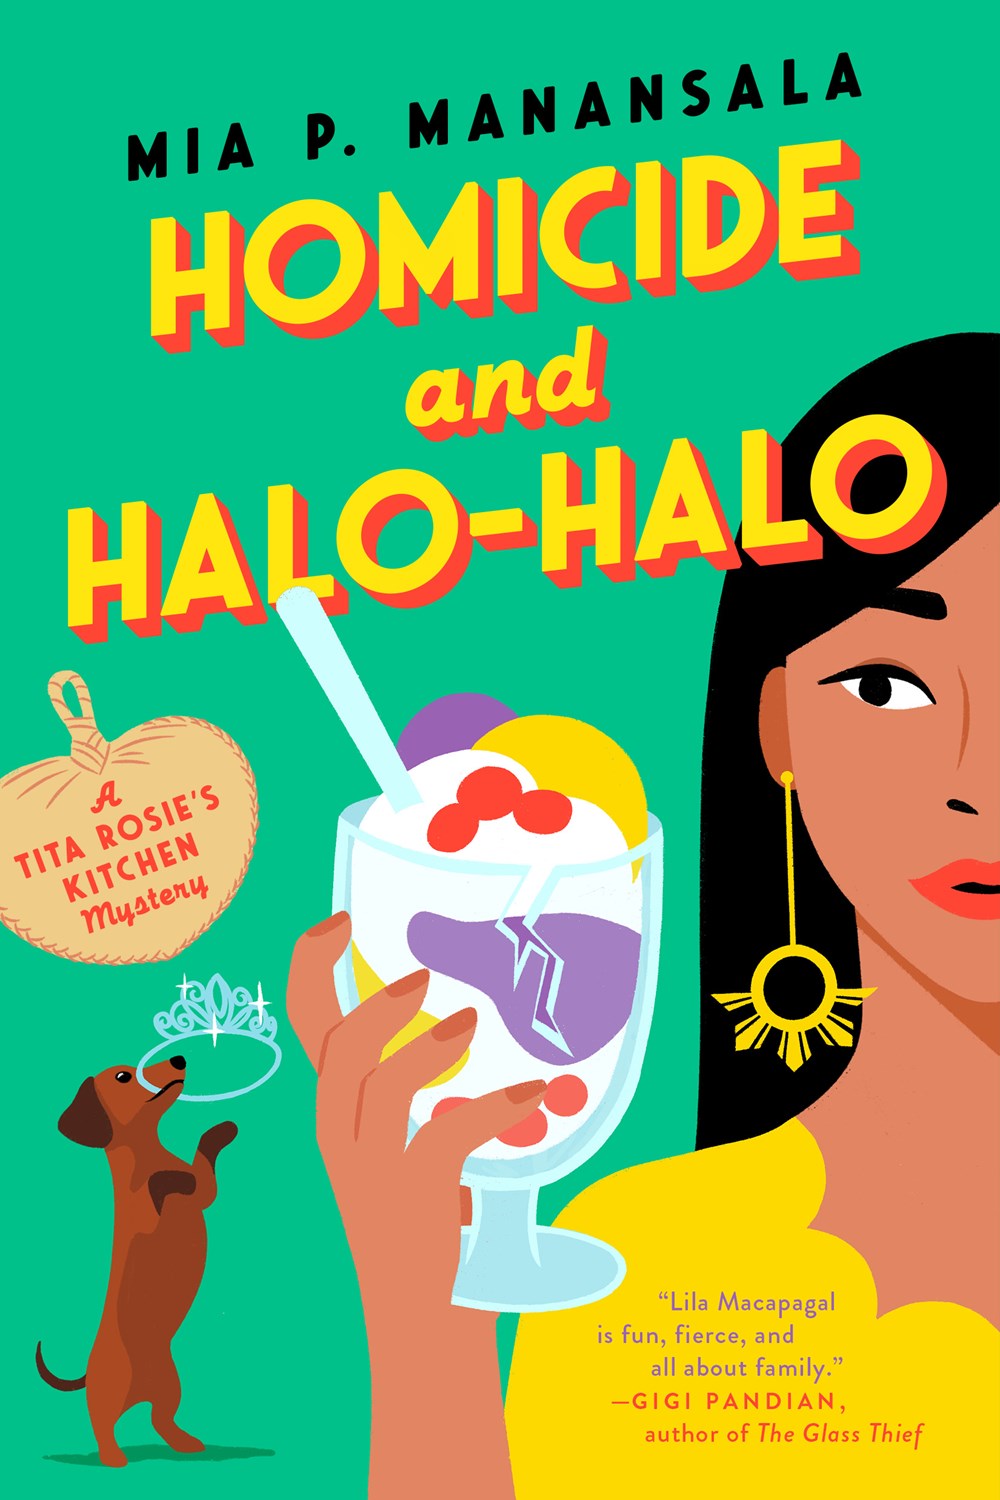 Homicide and Halo-Halo by Mia P. Manansala (Tita Rosie's Kitchen Mystery #2) (Paperback)